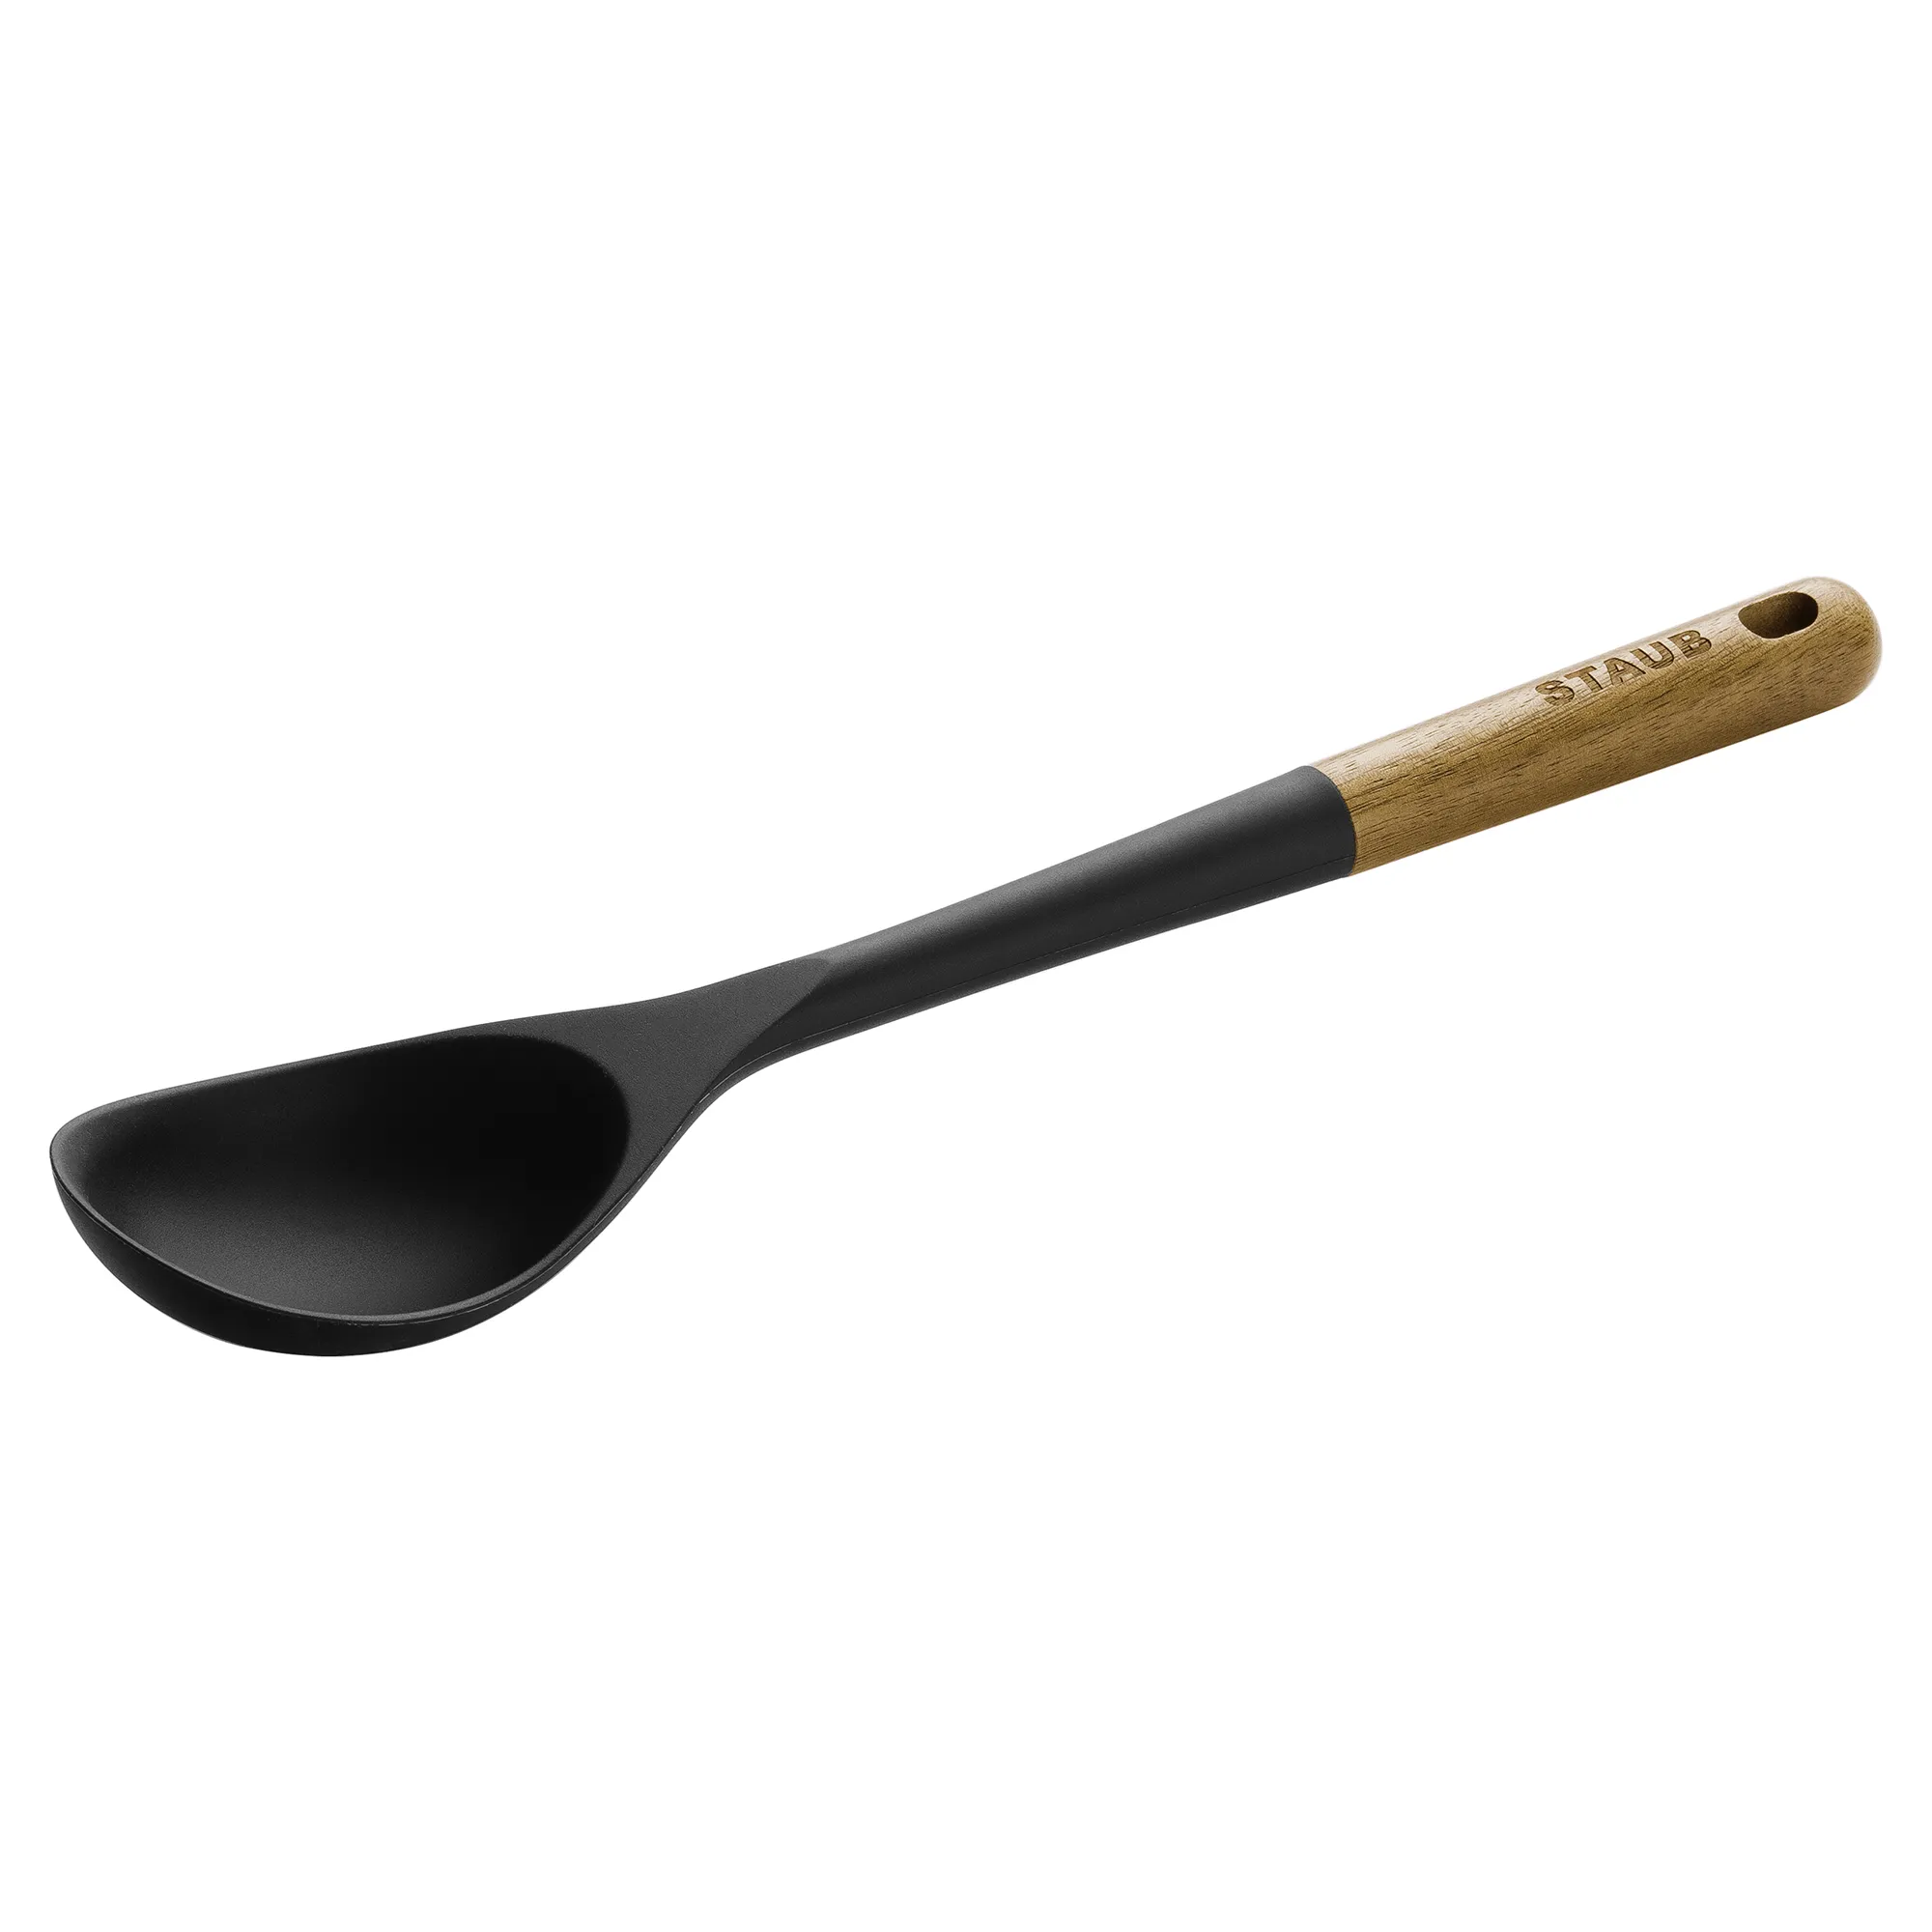 https://www.homethreads.com/files/zwilling/40503-107-staub-silicone-with-wood-handle-cooking-utensil-serving-spoon.webp